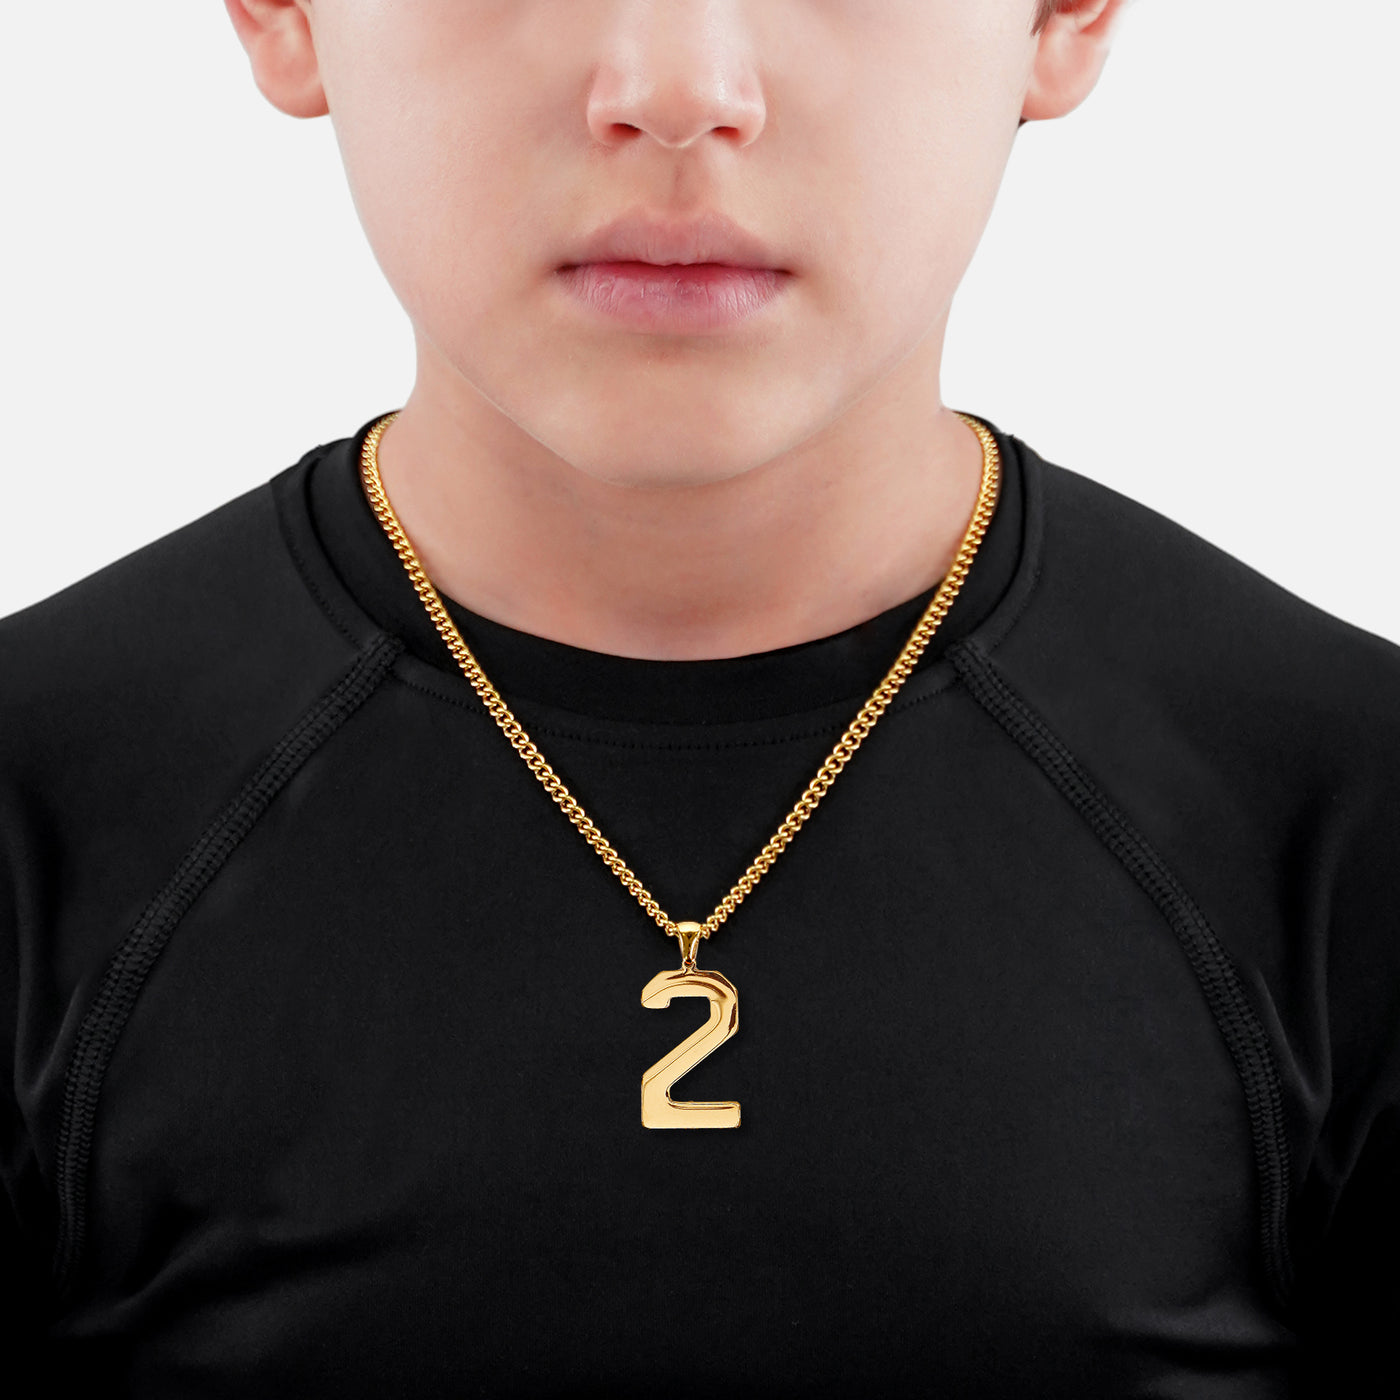 2 Number Pendant with Chain Kids Necklace - Gold Plated Stainless Steel